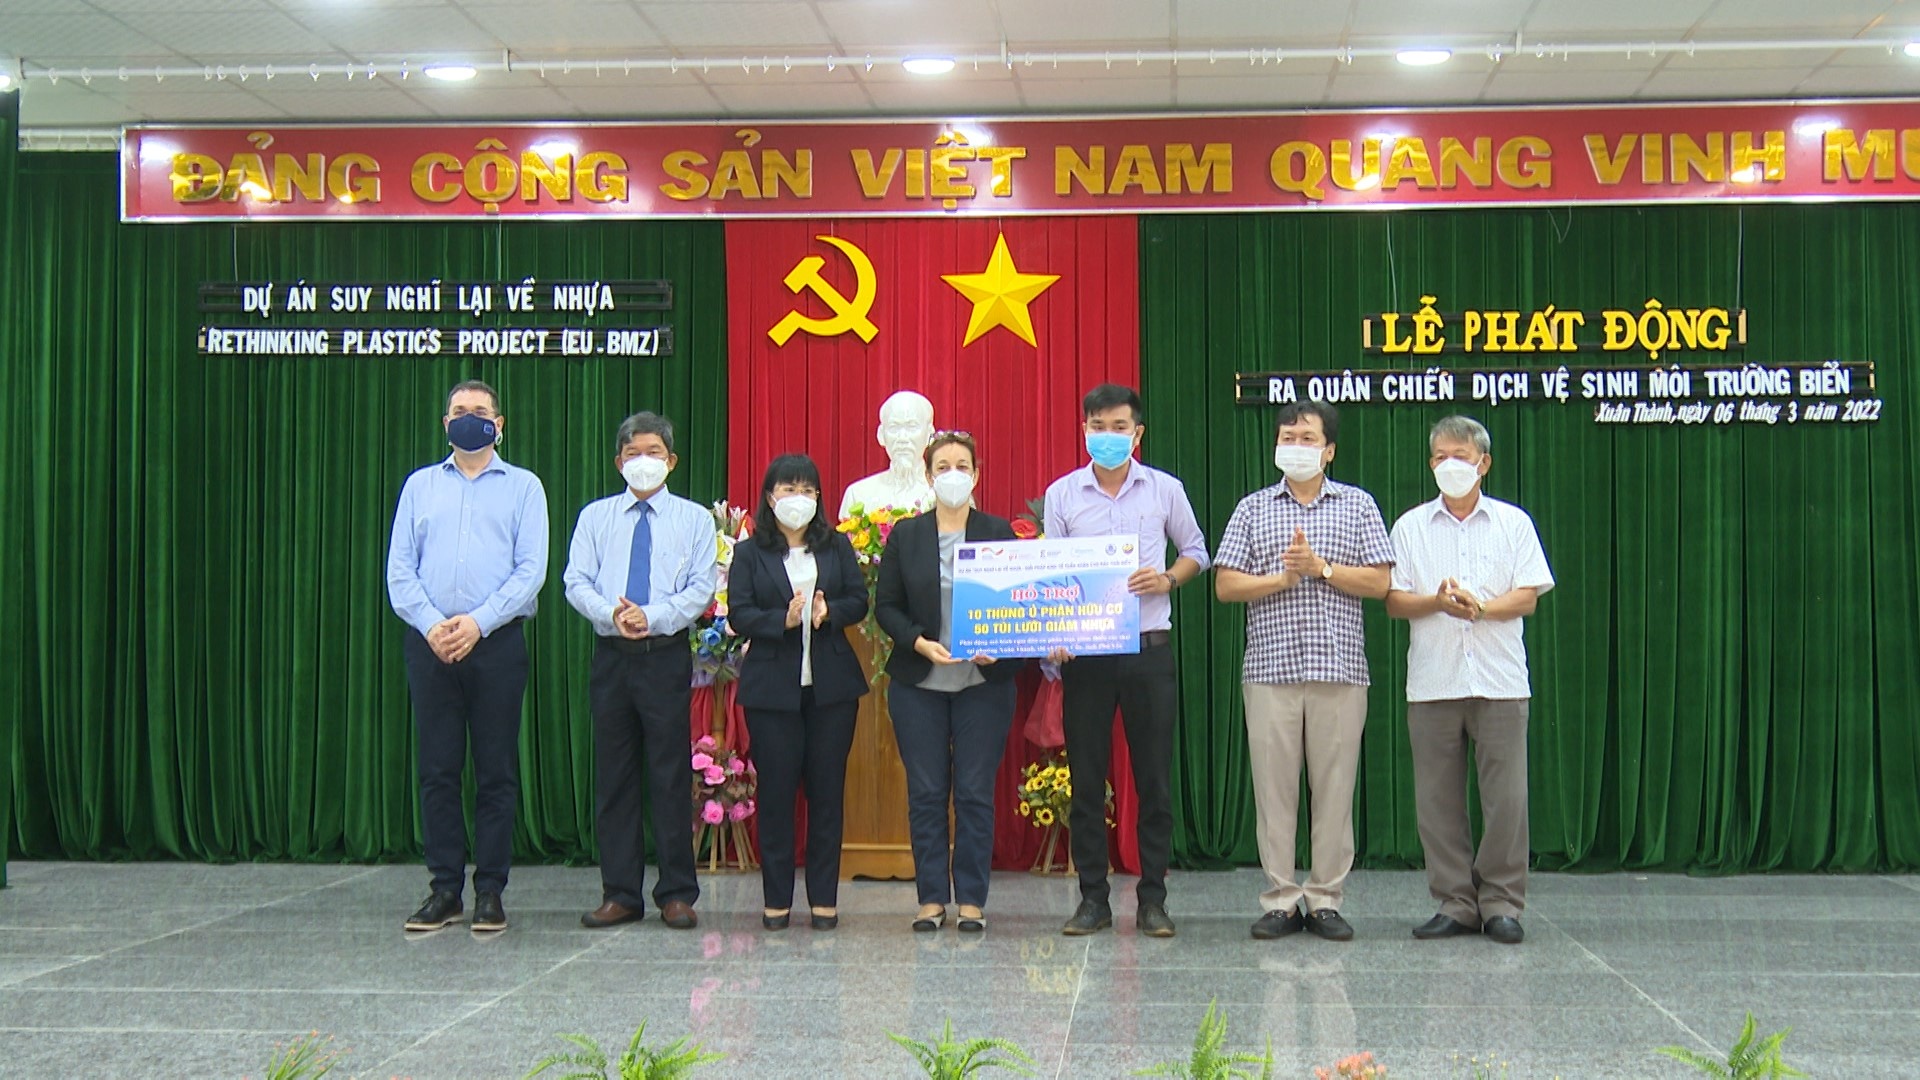 Quertamp presented a symbolic donation of 10 bins of organic waste and 50 net bags to the People's Committee of Xuan Thanh – a donation which was later realised at the clean-up at Xuan Dai Bay